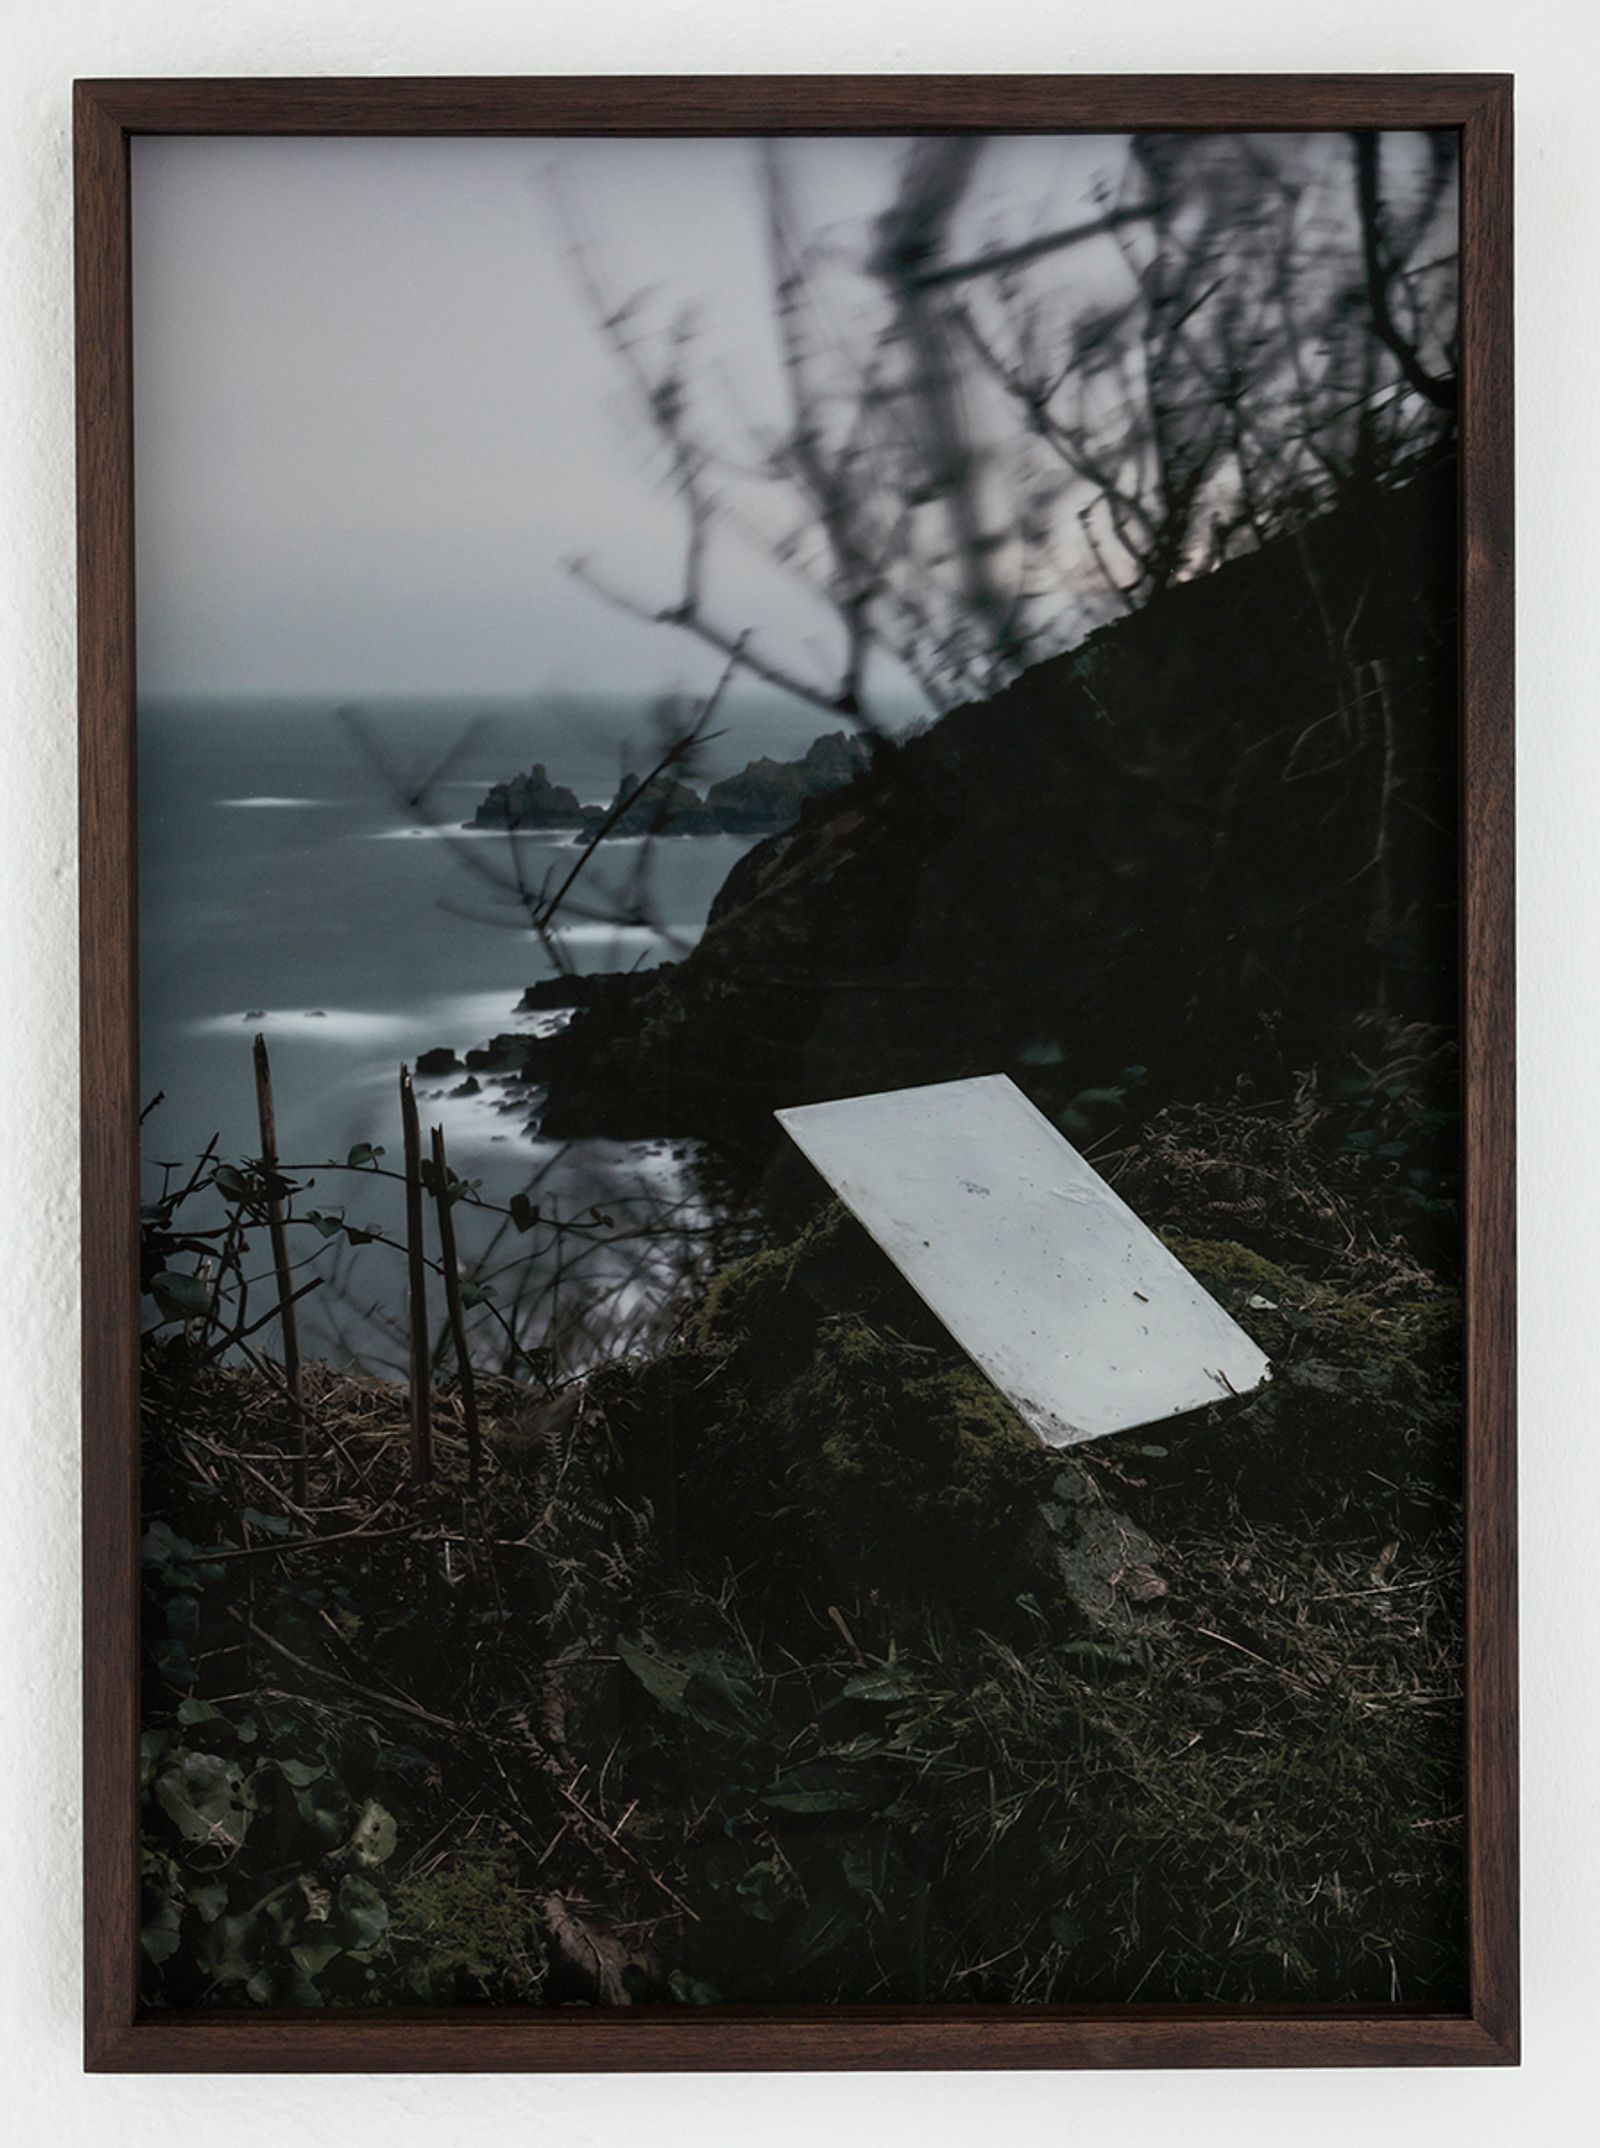 © Johan Österholm - "Moon Plate Exposing (Isle of Sark)" (2017). Found glass from the Isle of Sark being exposed to the light of the full moon.